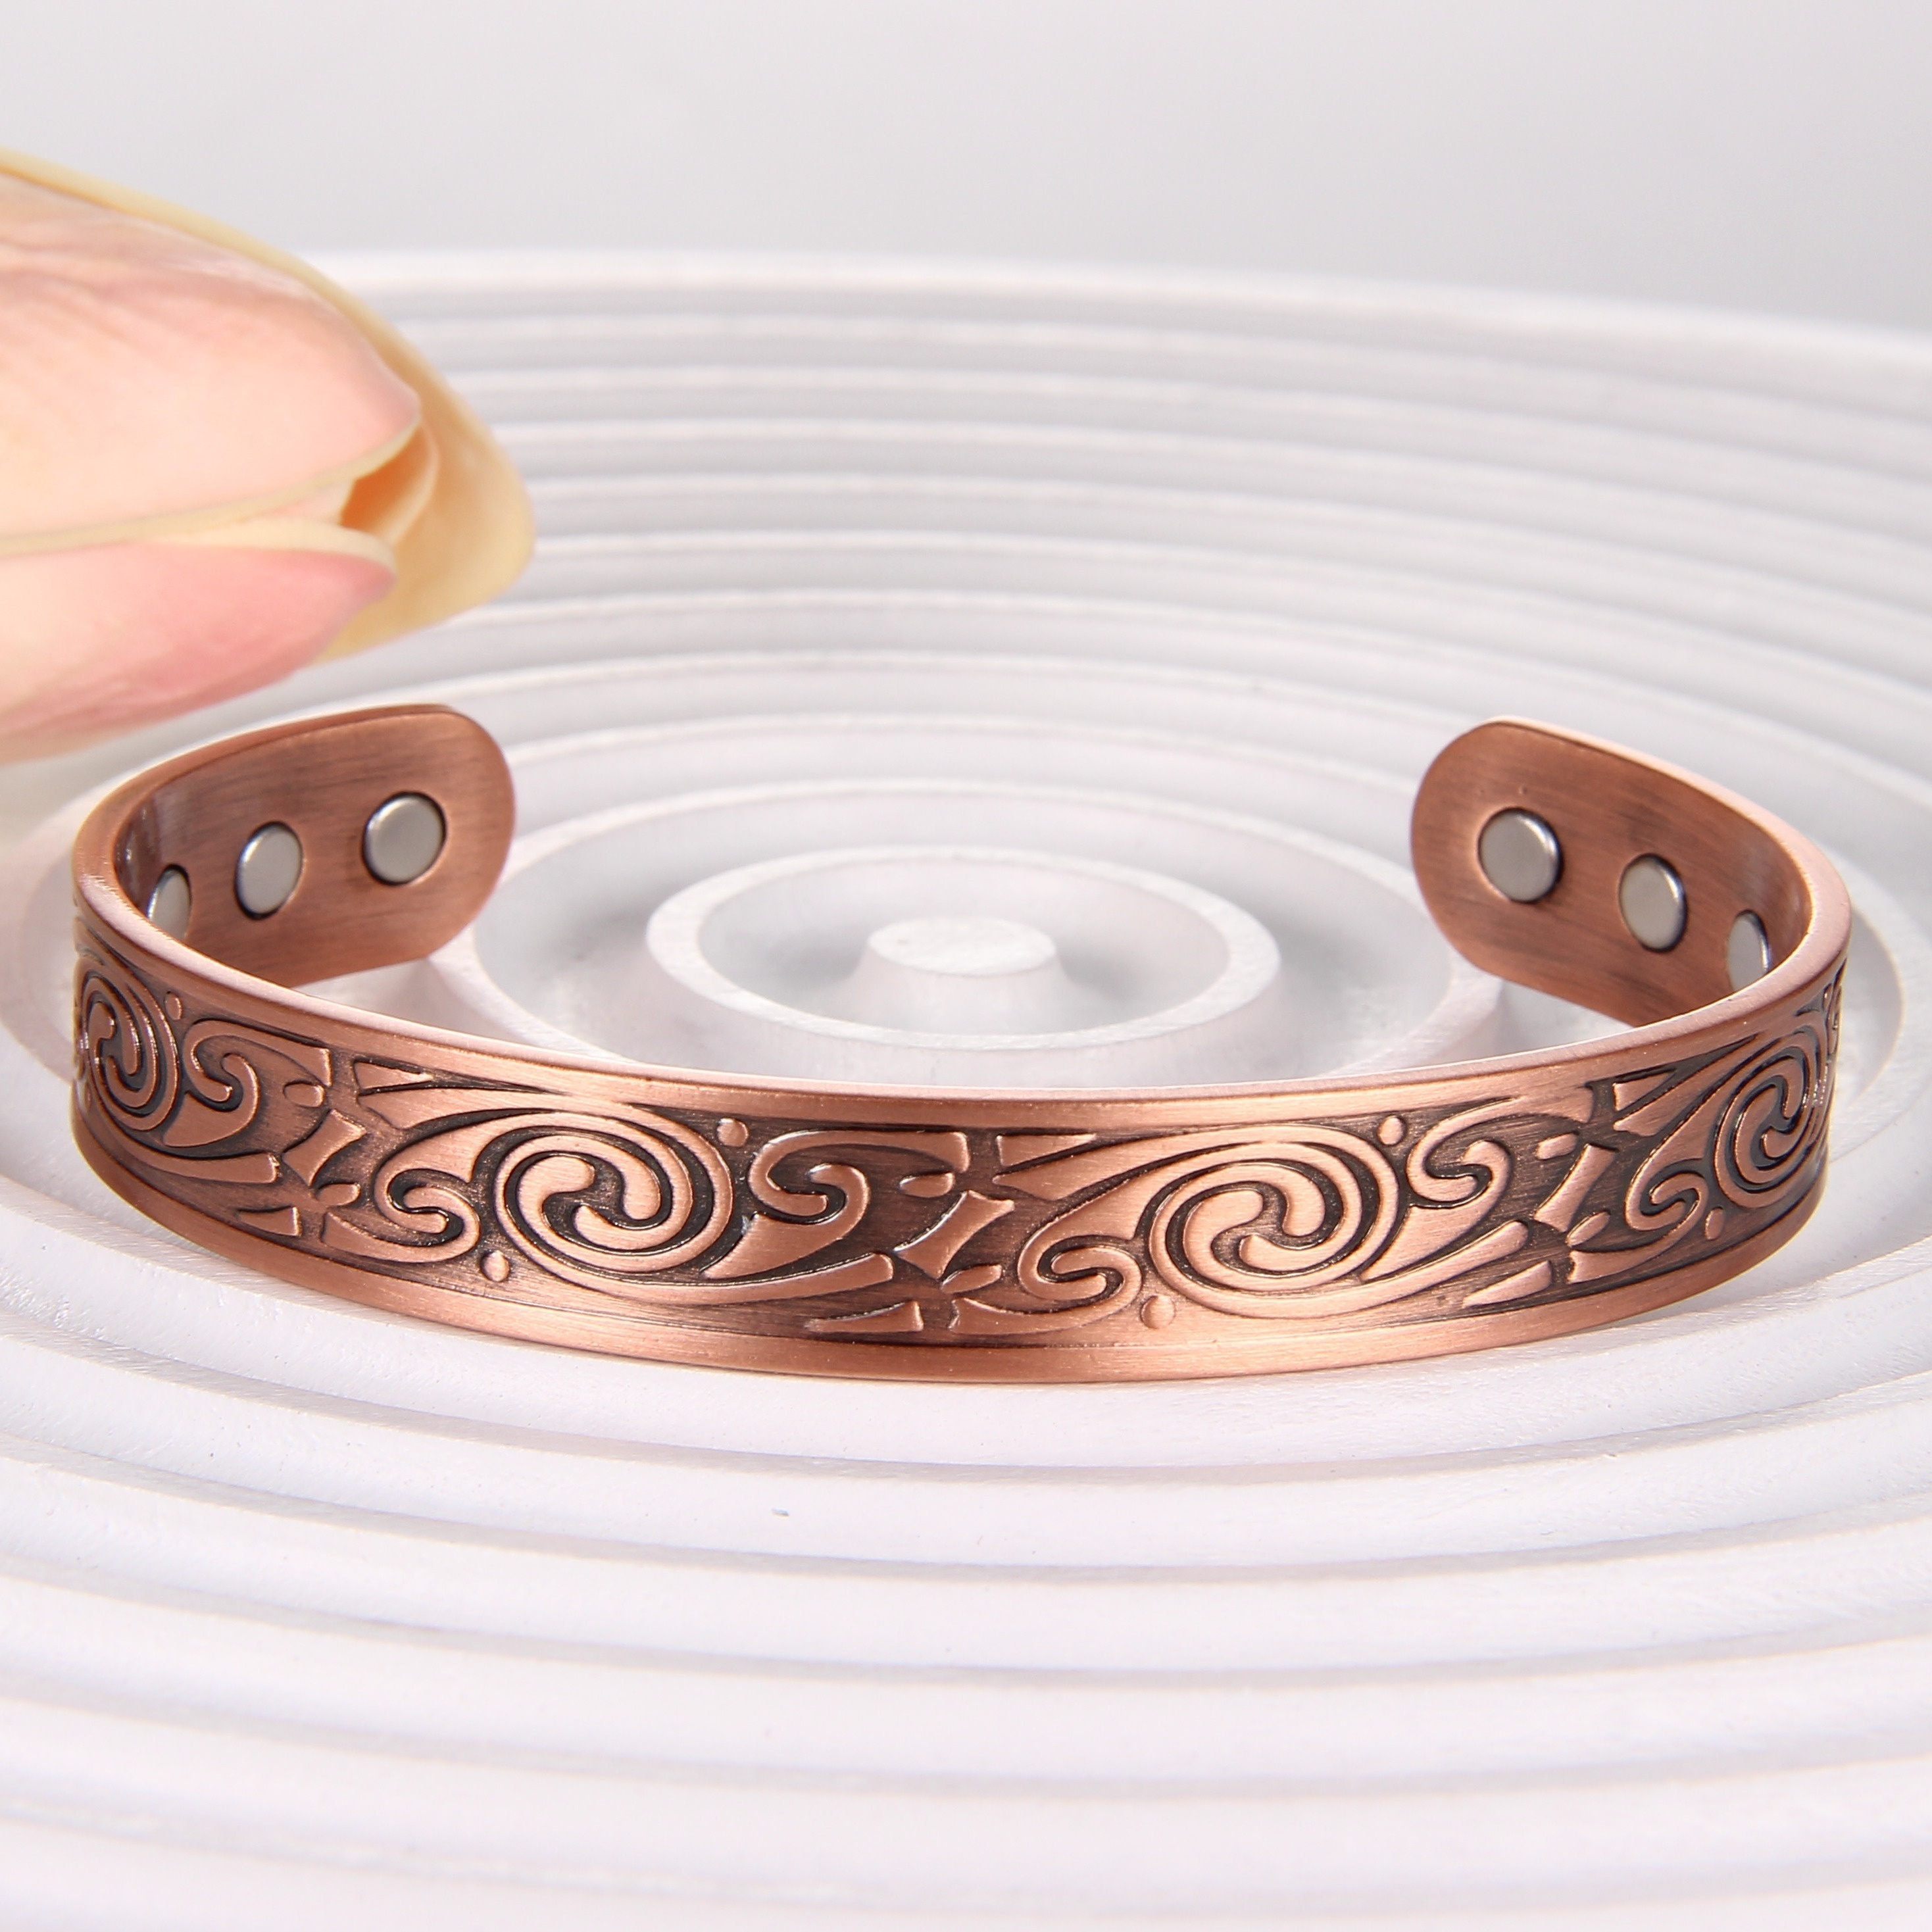 

1pc 99.99% Pure Copper Bracelet For Men, Viking Design Magnetic Bracelet Cuff Bangle With 3500 Gauss Magnets, Adjustable Magnetic Bracelet Cuff Jewelry Valentine's Day Gift For Husband